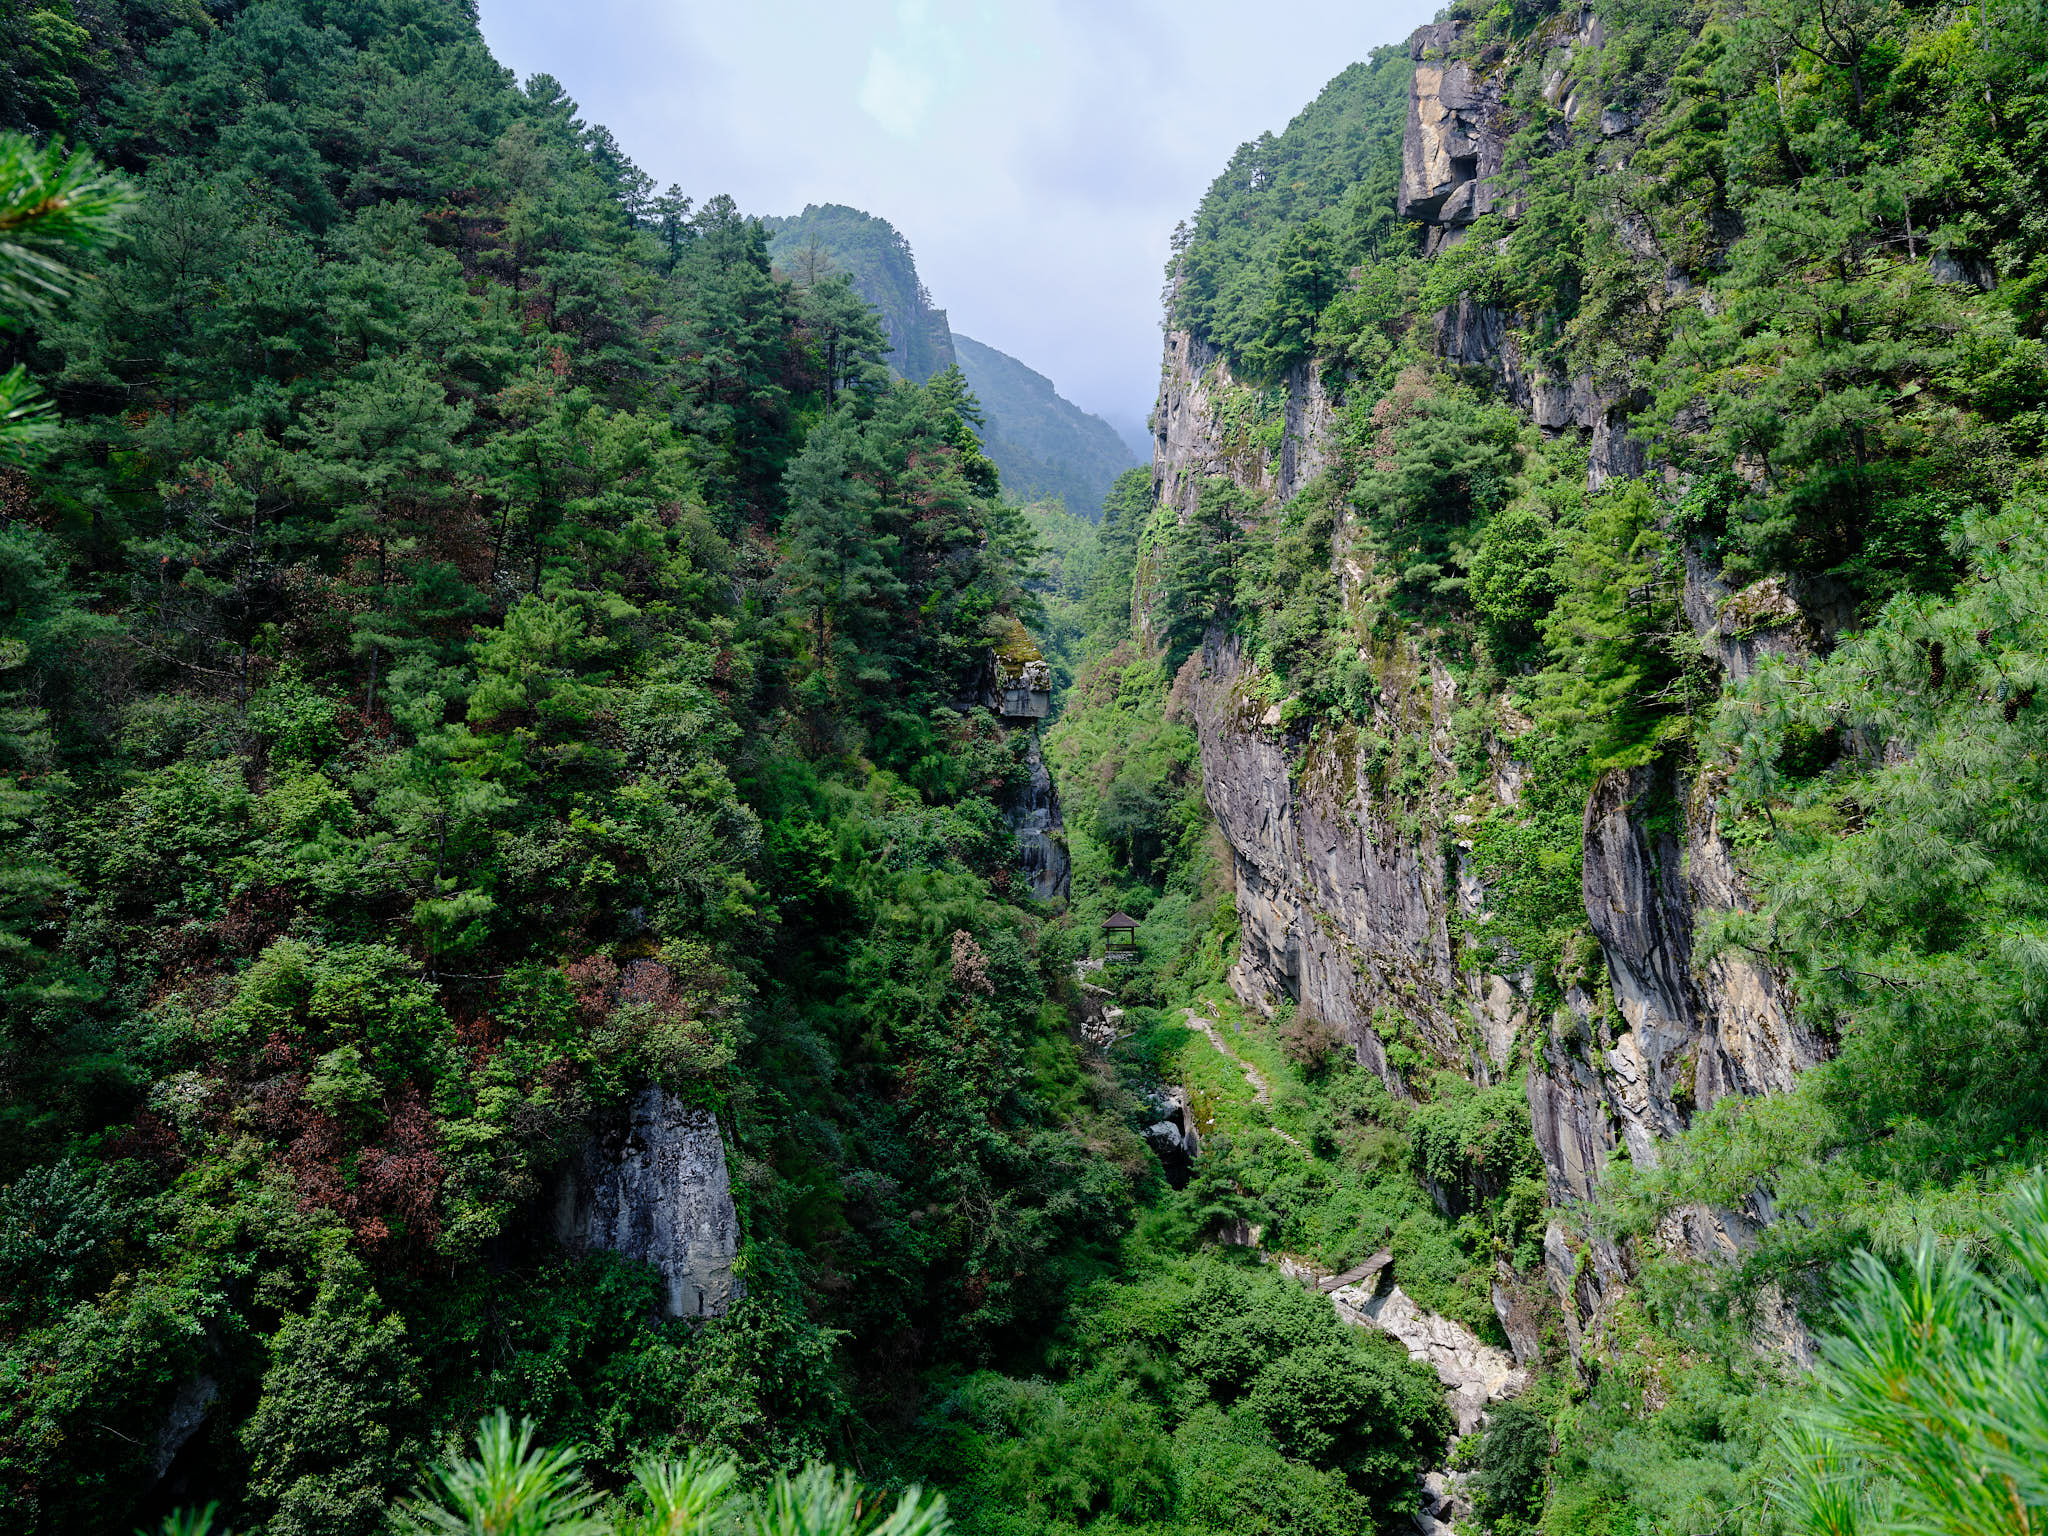 Cangshan Mountain scenery from the Jade Trail